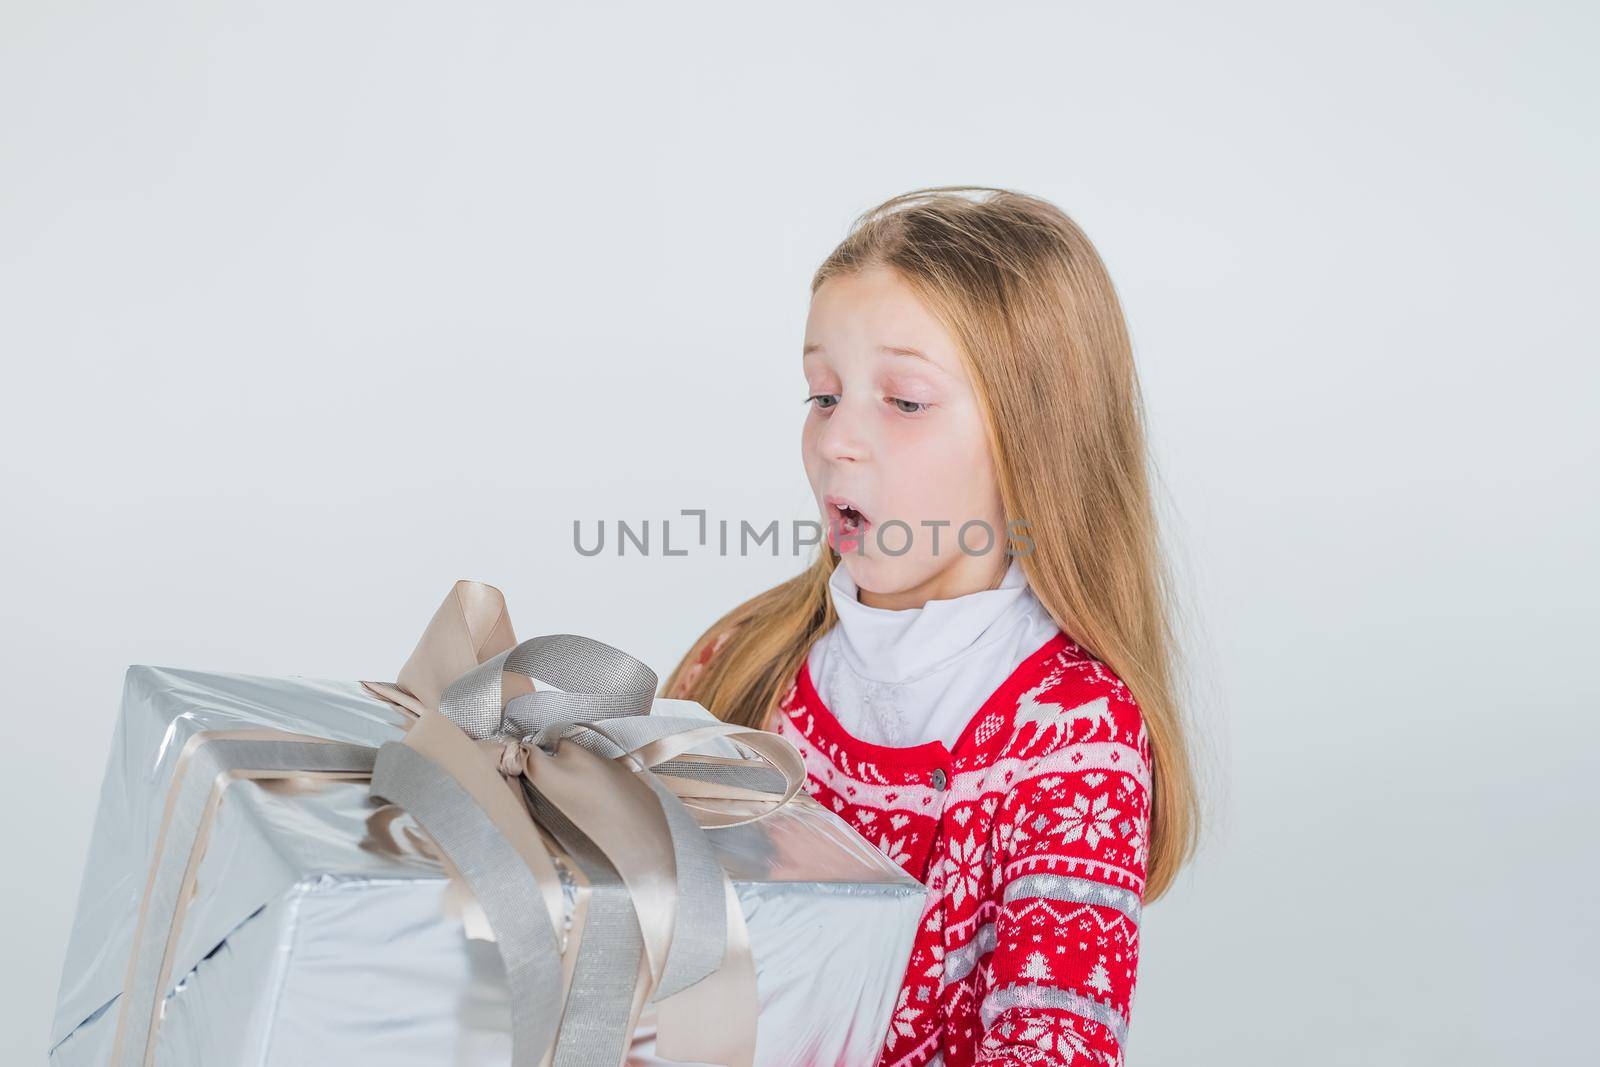 Joyous female kid shouting holding gift-wrapped box being excited and surprised to get birthday present, over pink background